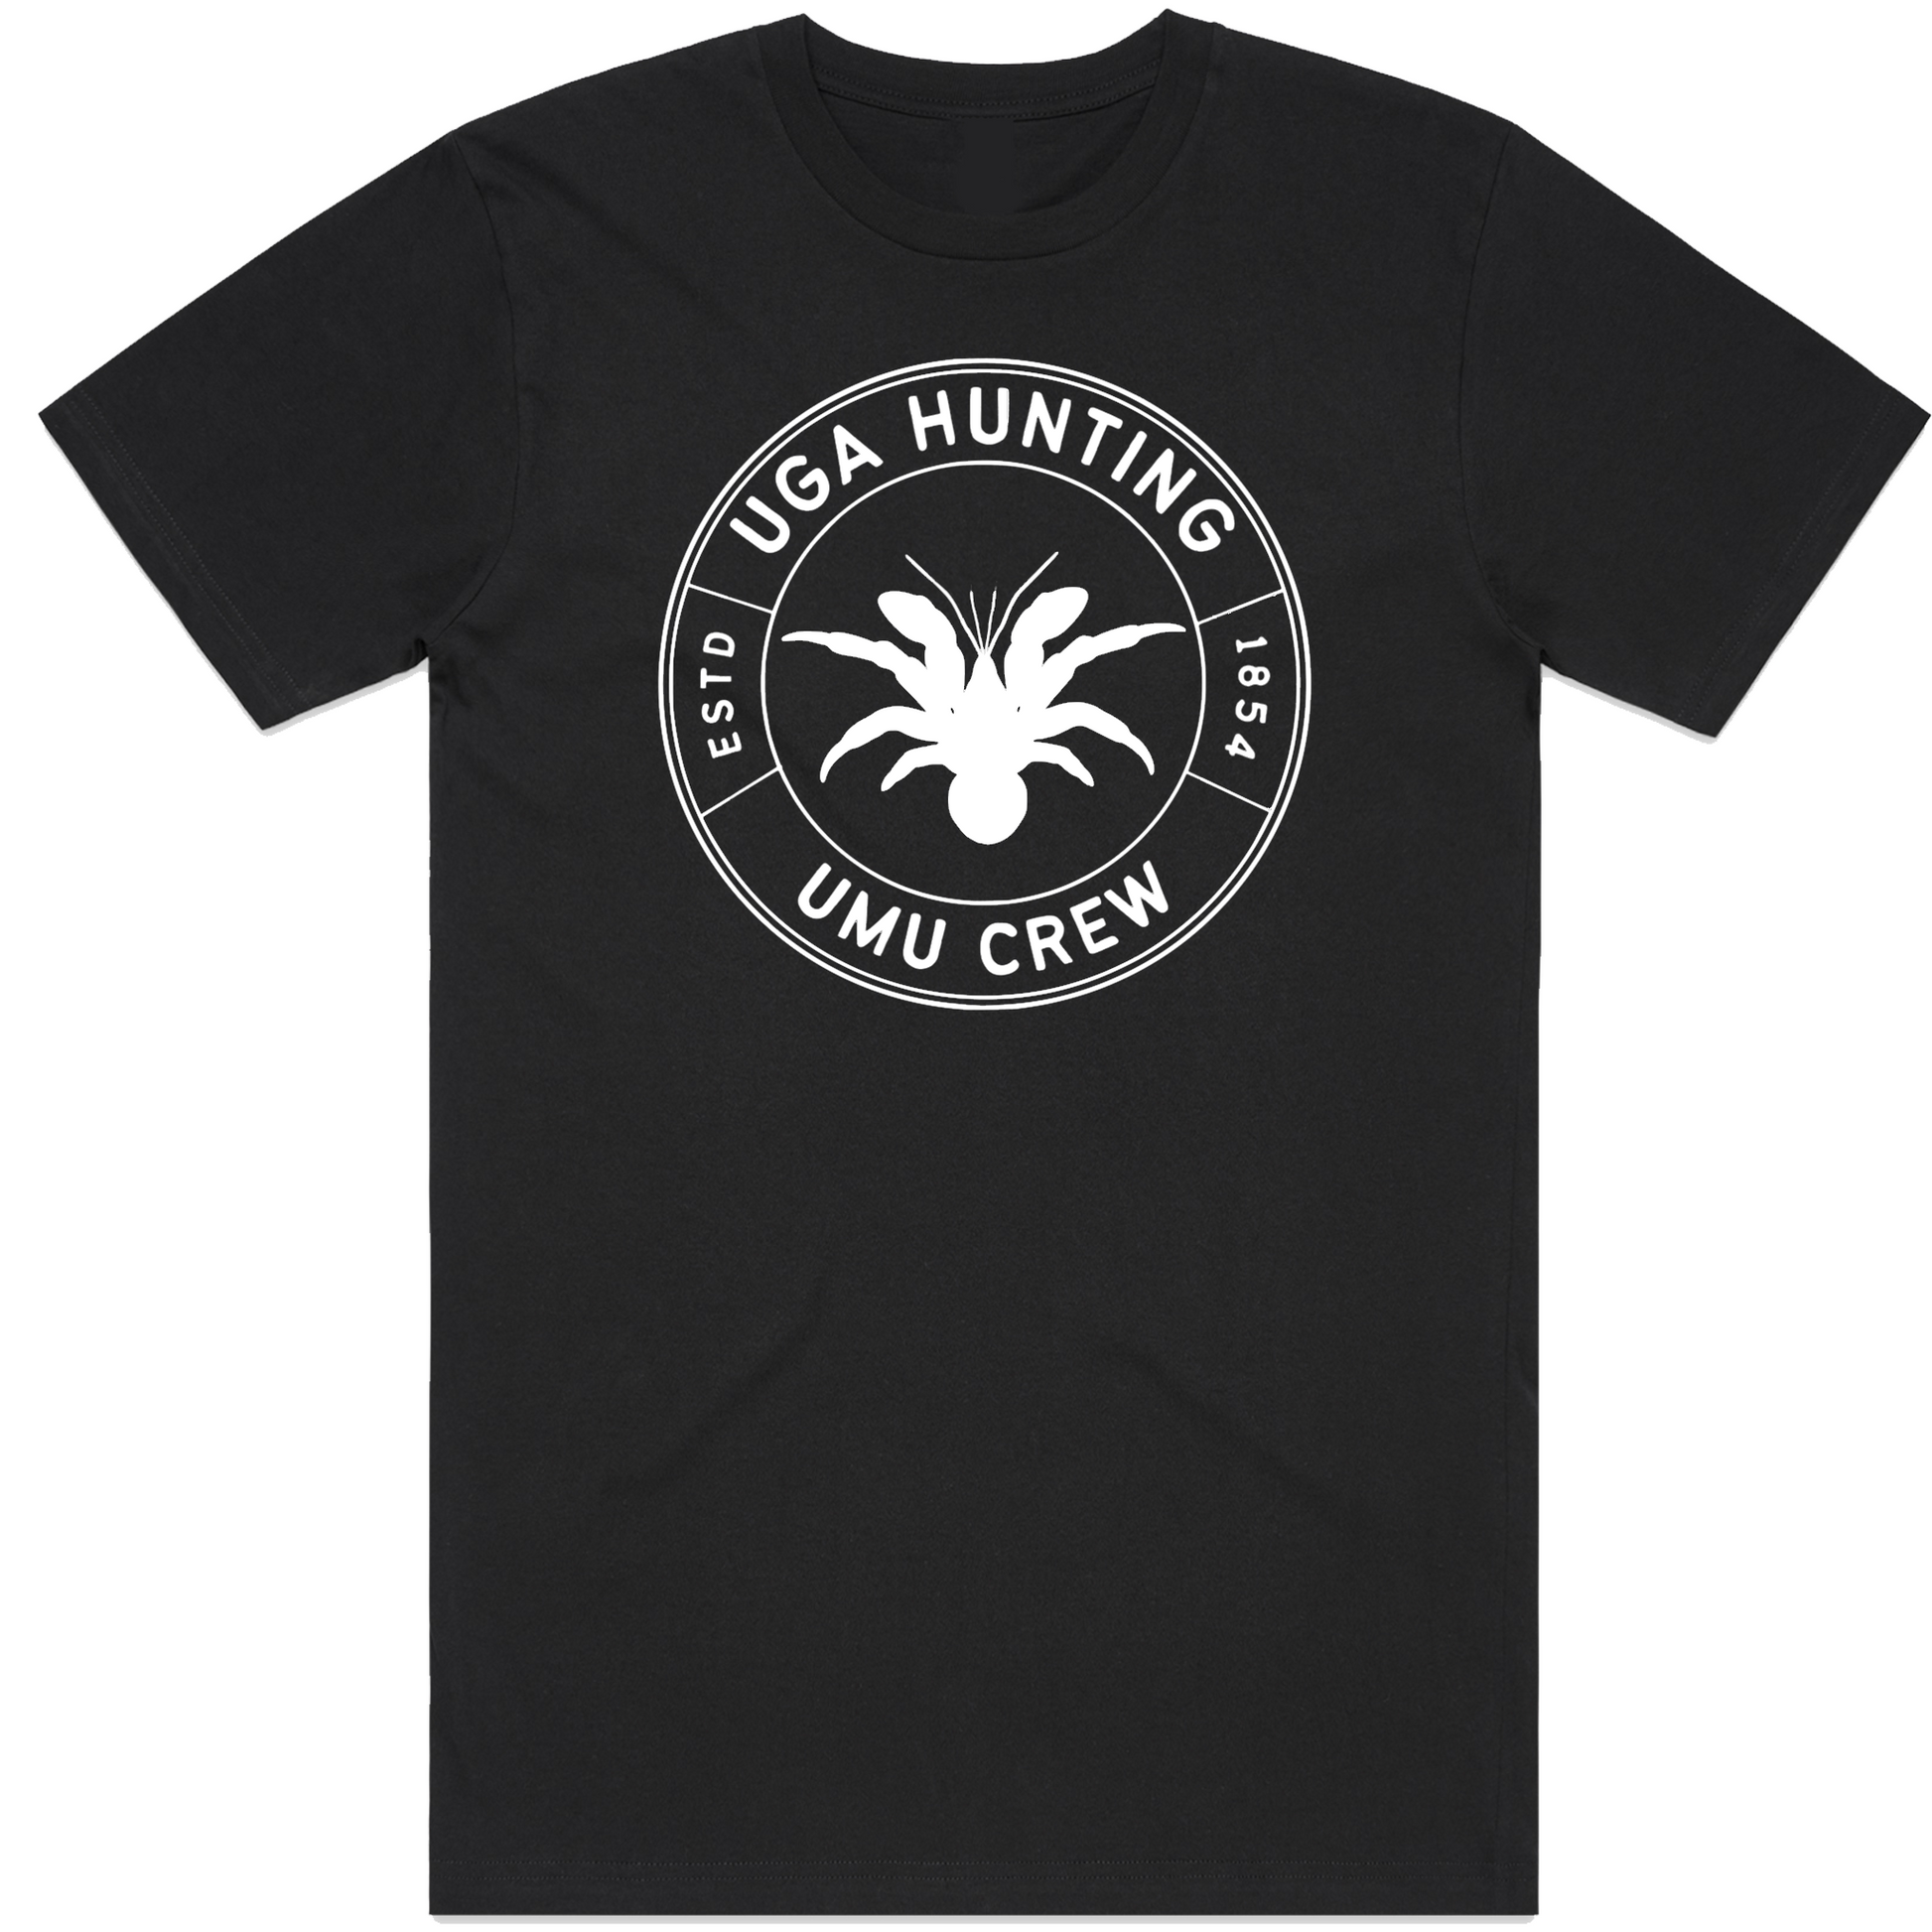 Uga hunting t-shirt design. part of the umu crew collection. white design on a black t-shirt. features a coconut crab or Uga in Niue.